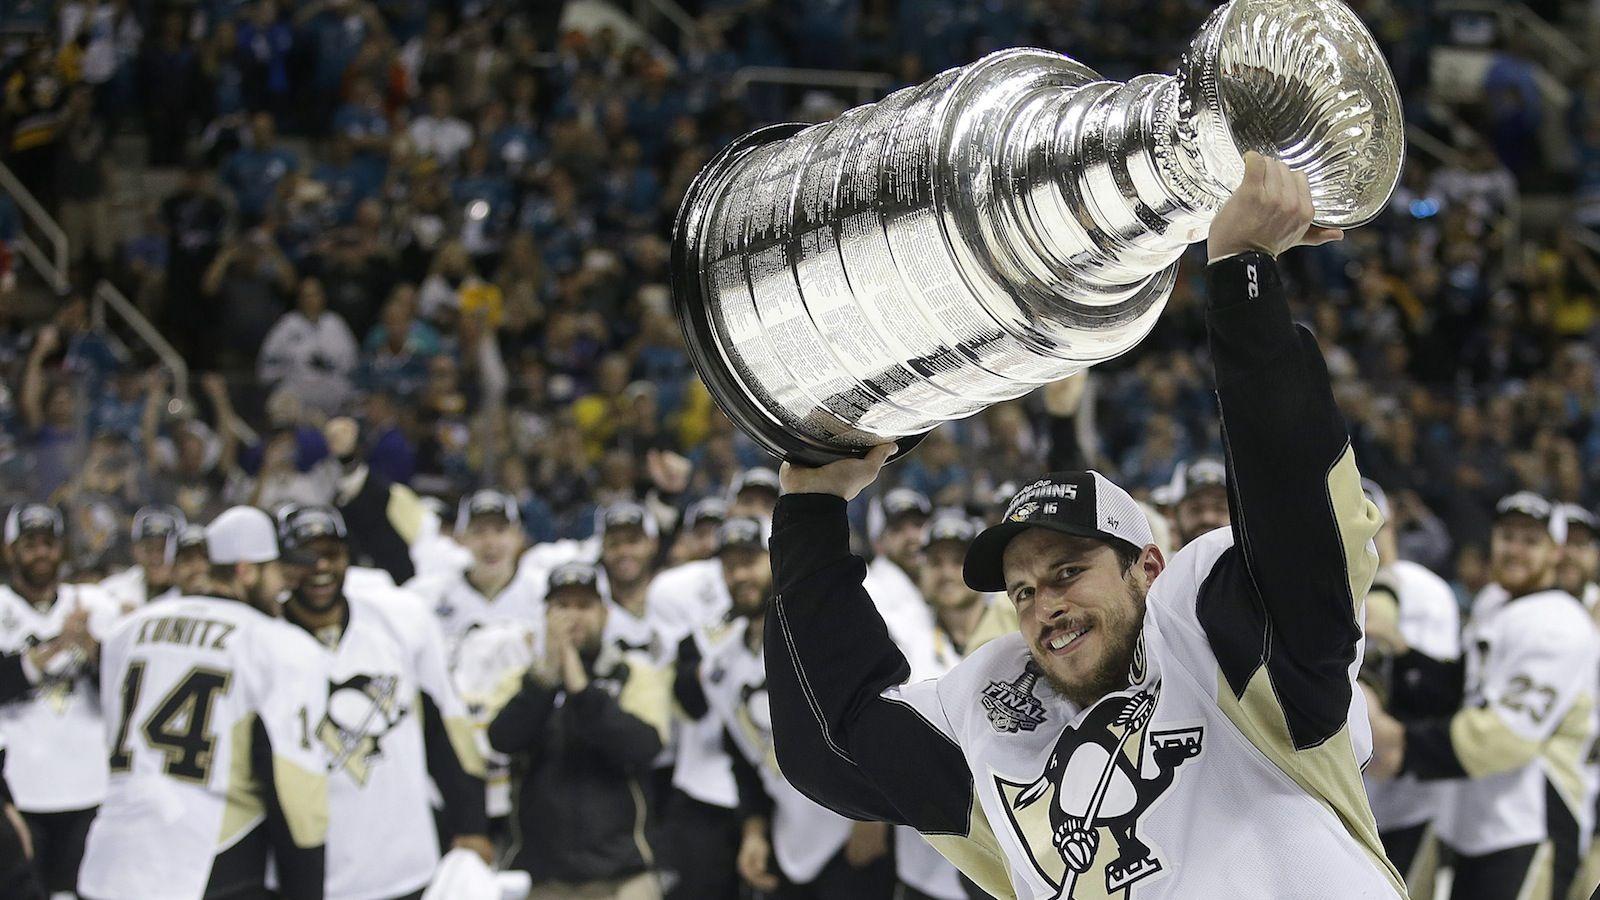 Sidney Crosby's hometown throws him—and the Stanley Cup—a parade